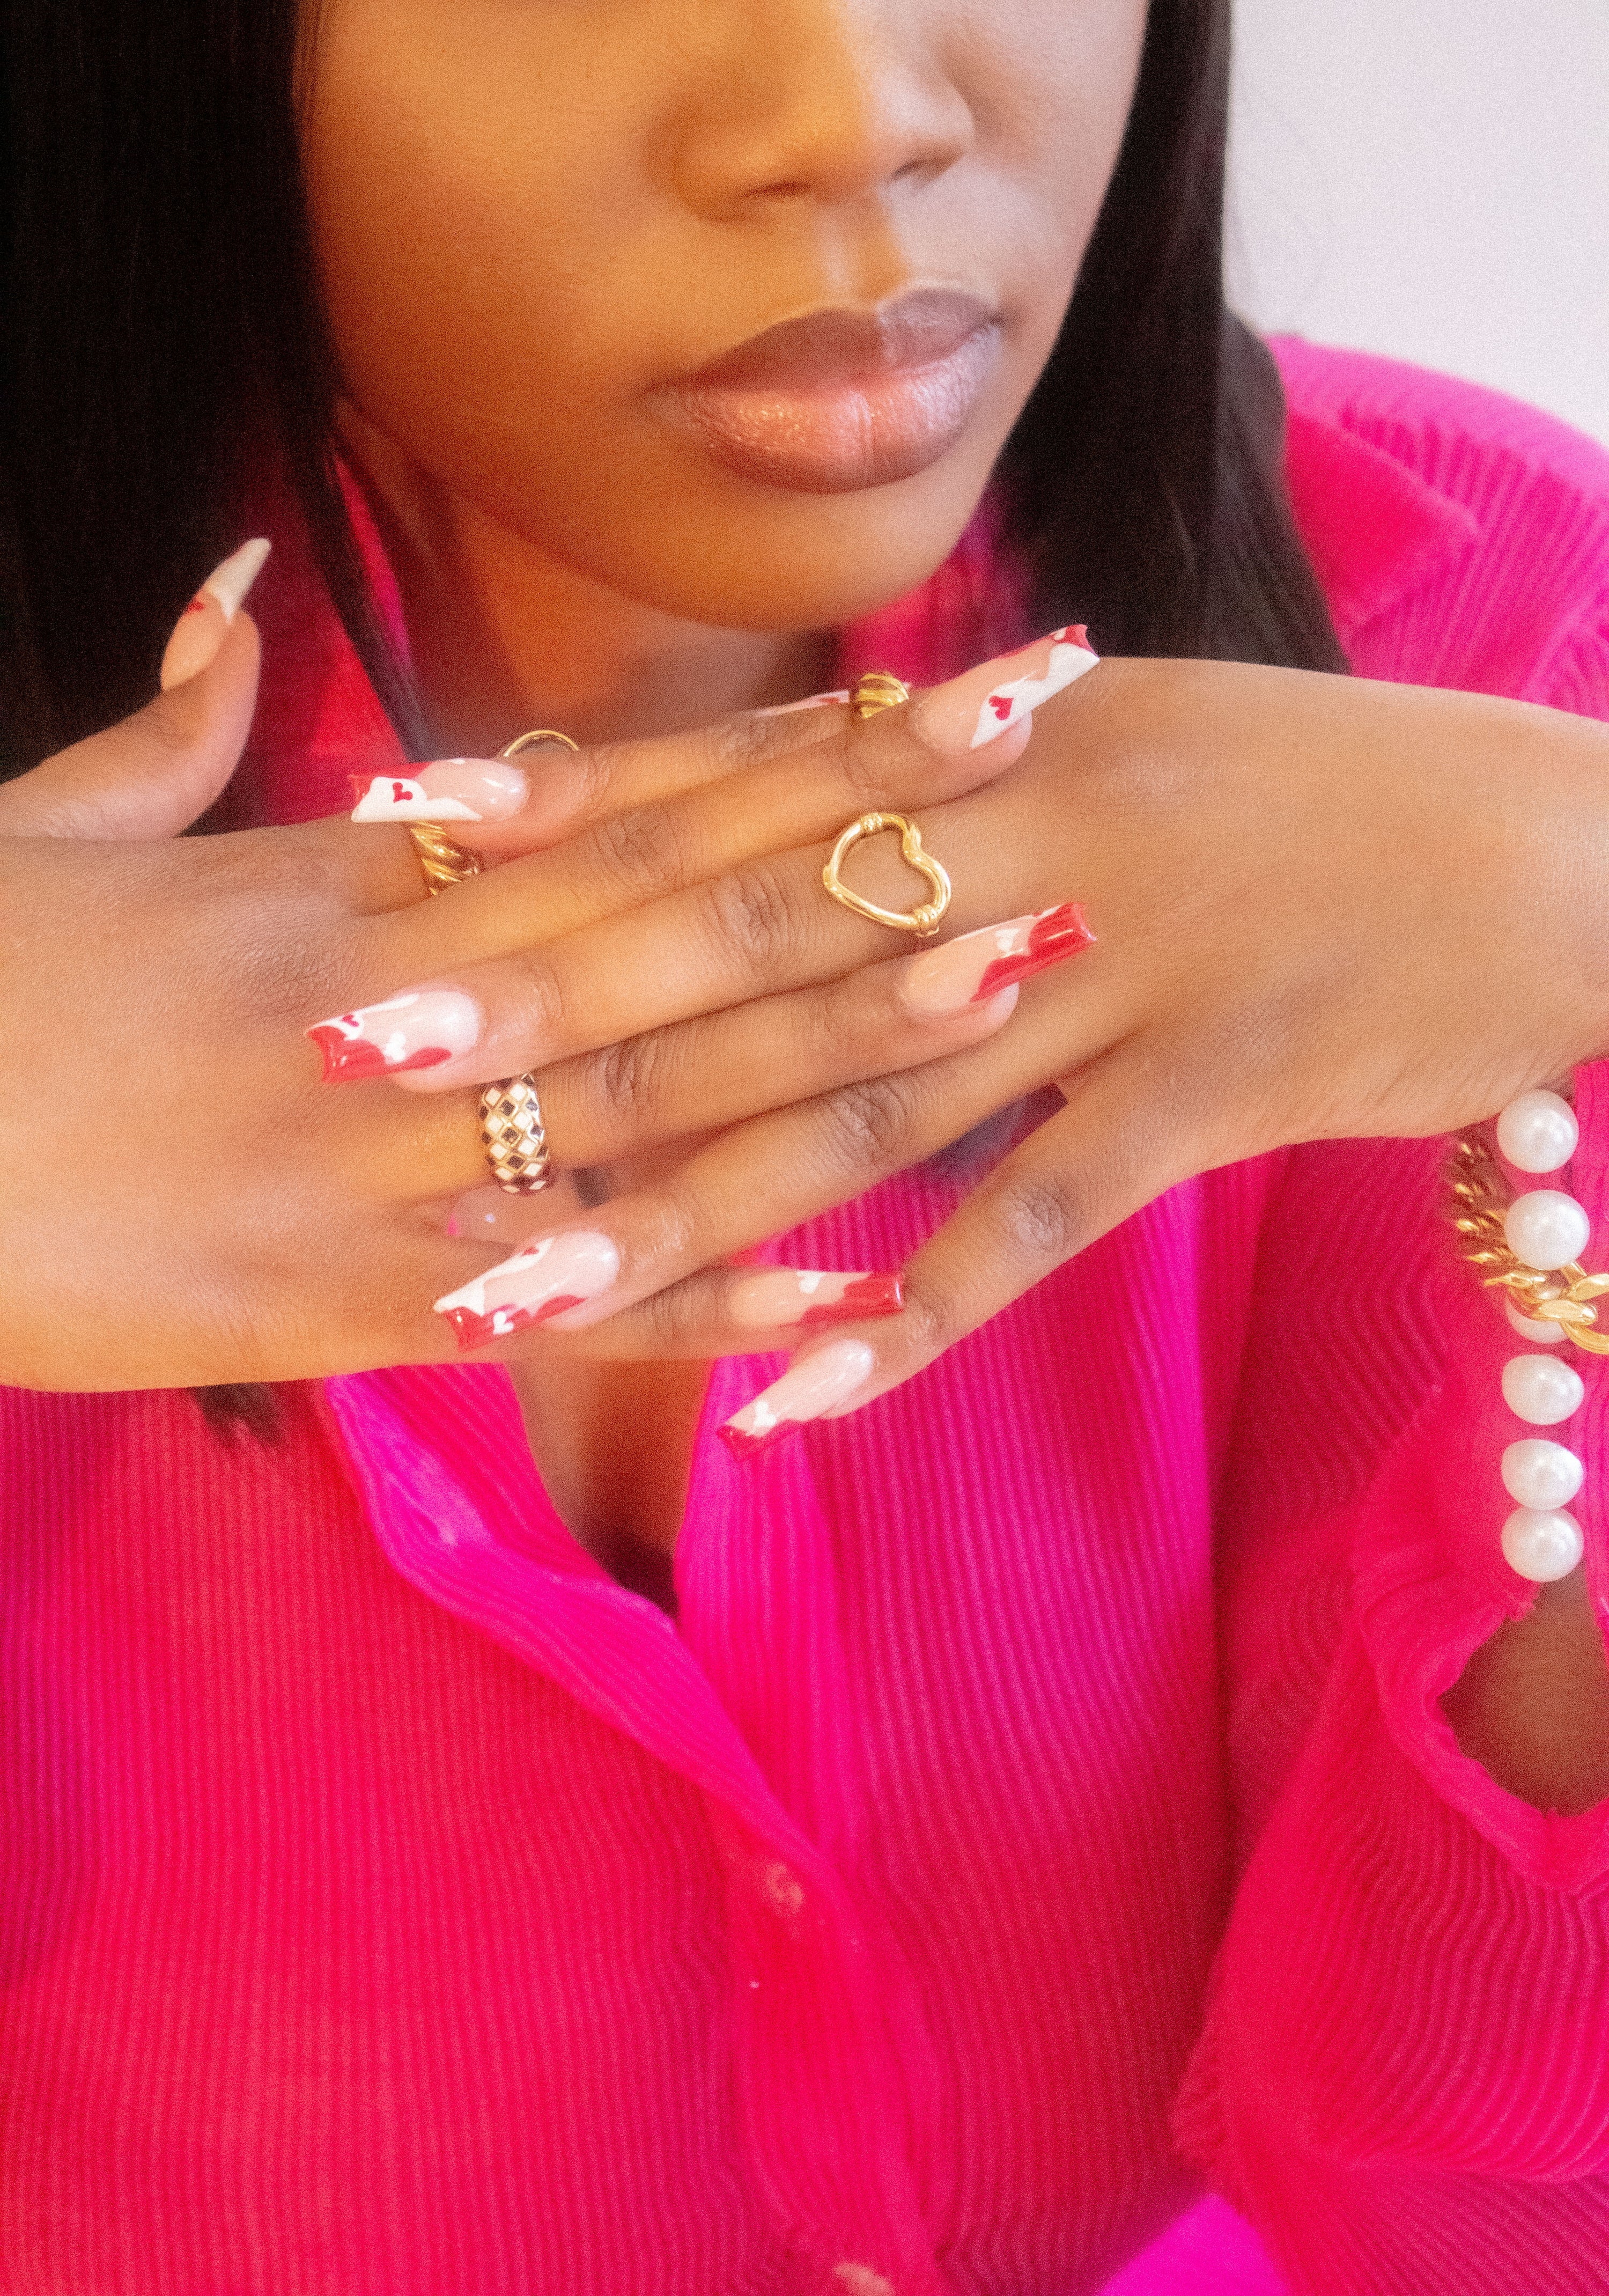 Emmanuela Okon wearing a pink top and posing with her hands interlocked wearing Ella's Element Hollow Heart Out Ring | Stainless Steel Jewelry | E's Element 